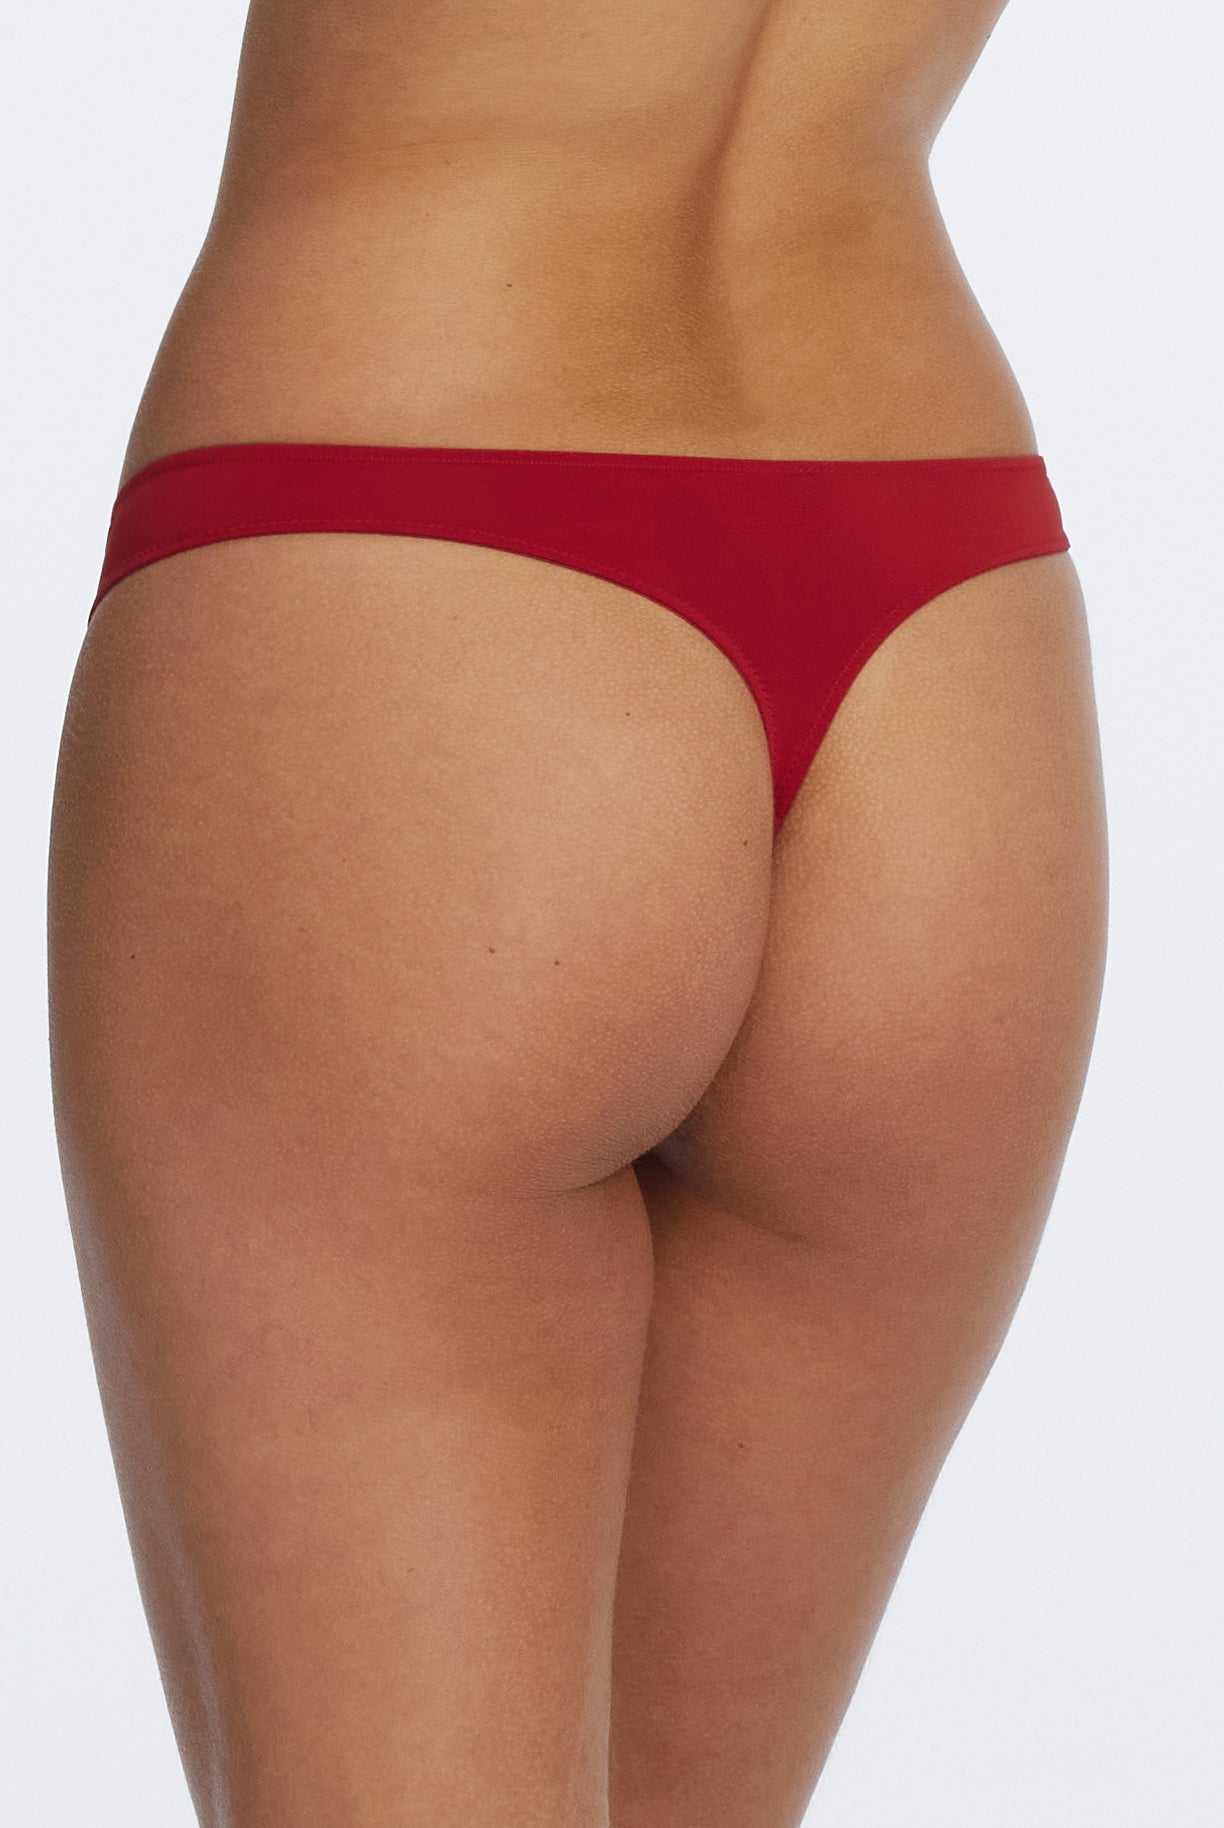 Entice Front Lace Thong - Lipstick Red